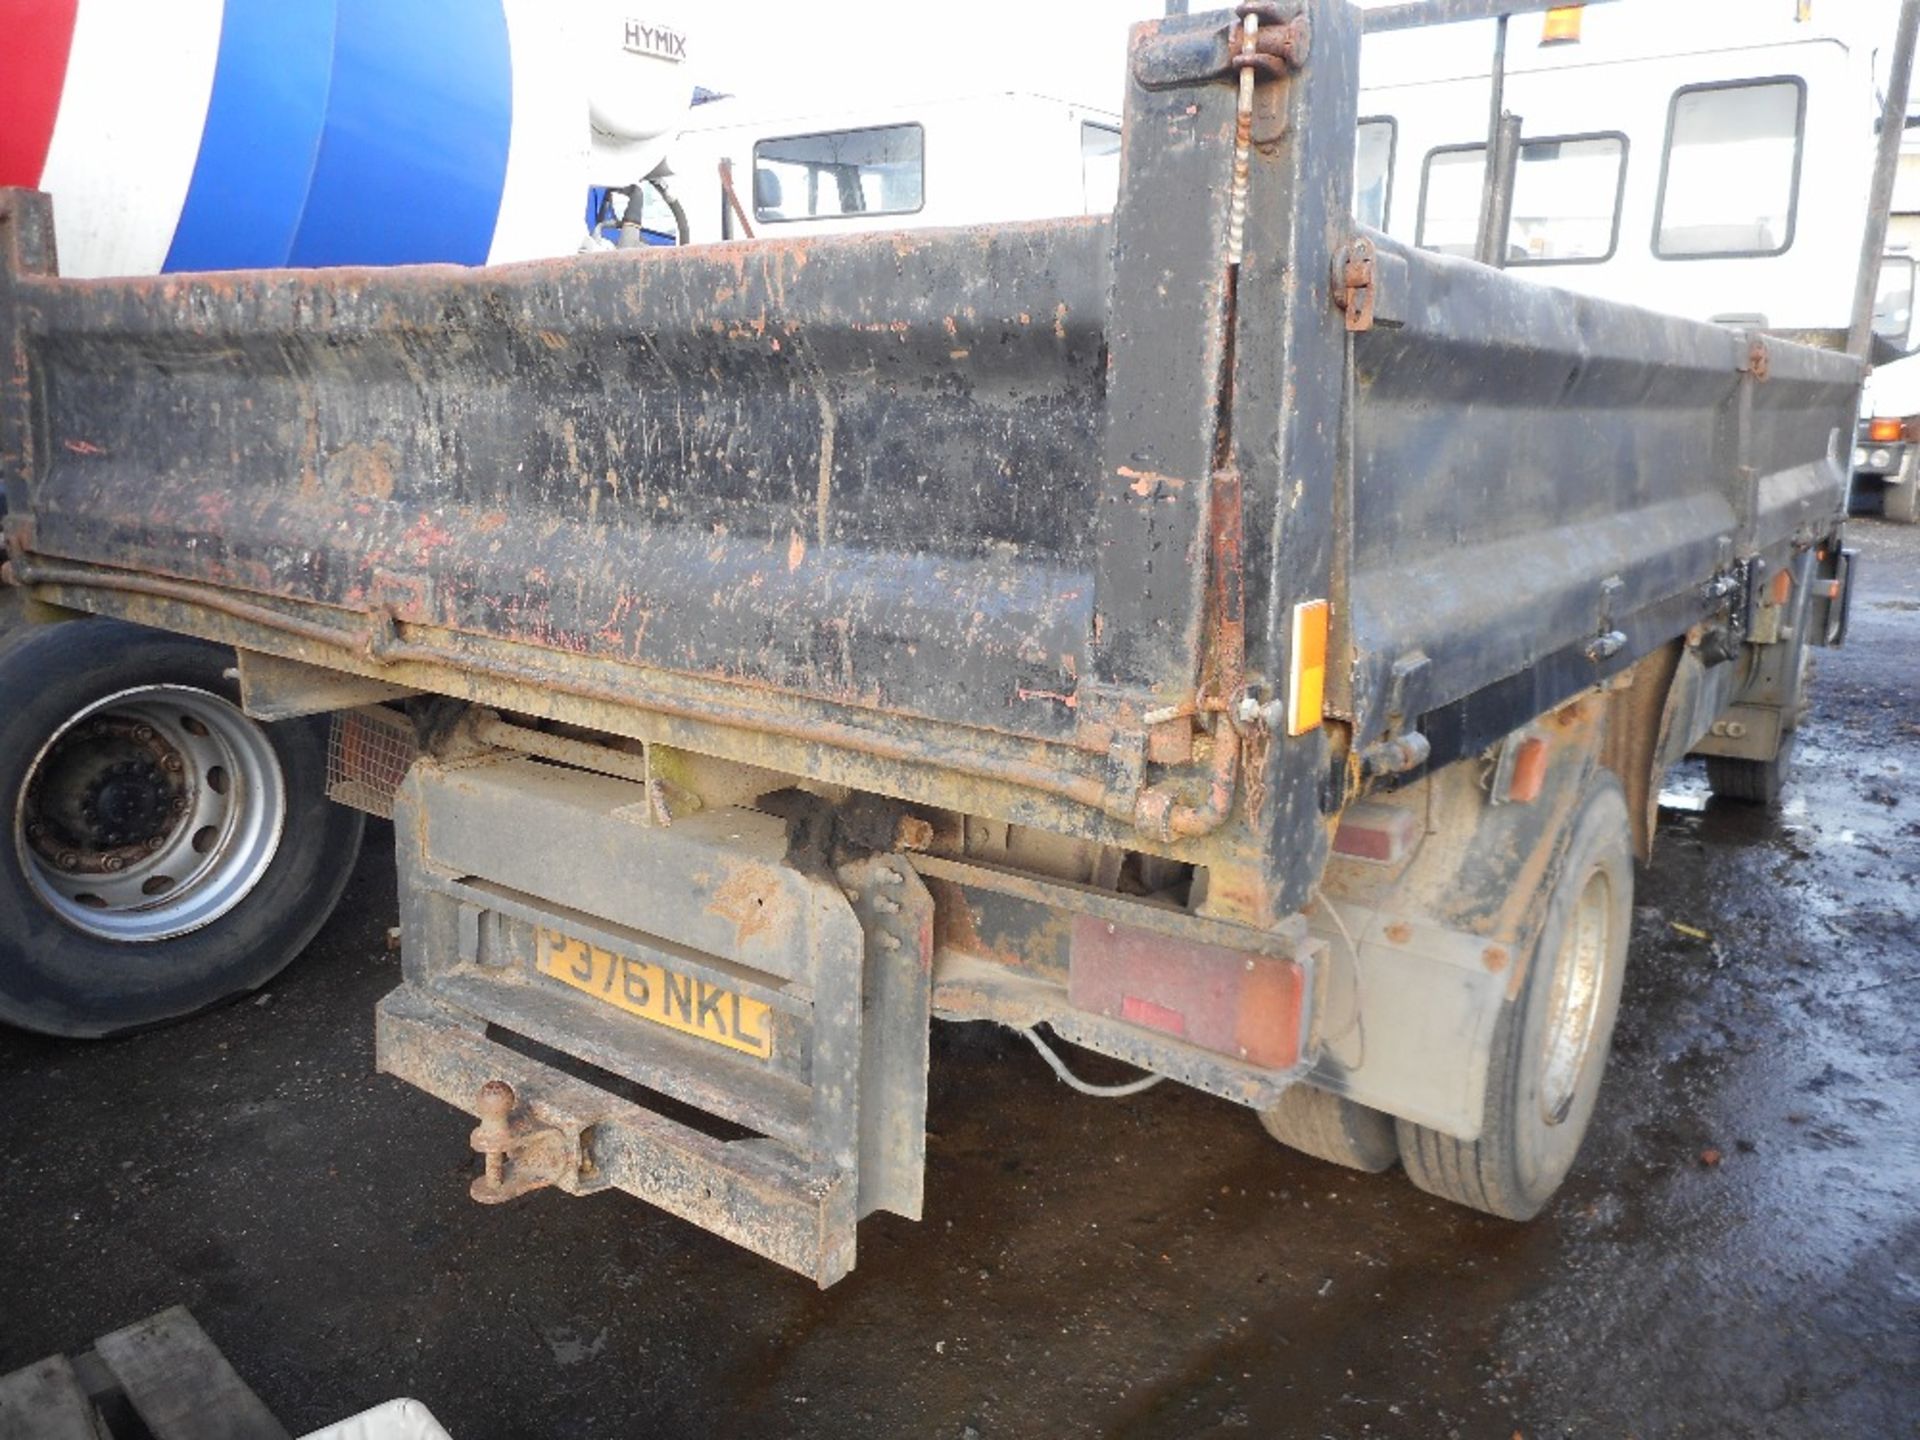 Ford Cargo 75E15 tipper year 1996 approx reg:P376 NKL  Edbro tipping gear fitted. - Image 7 of 8